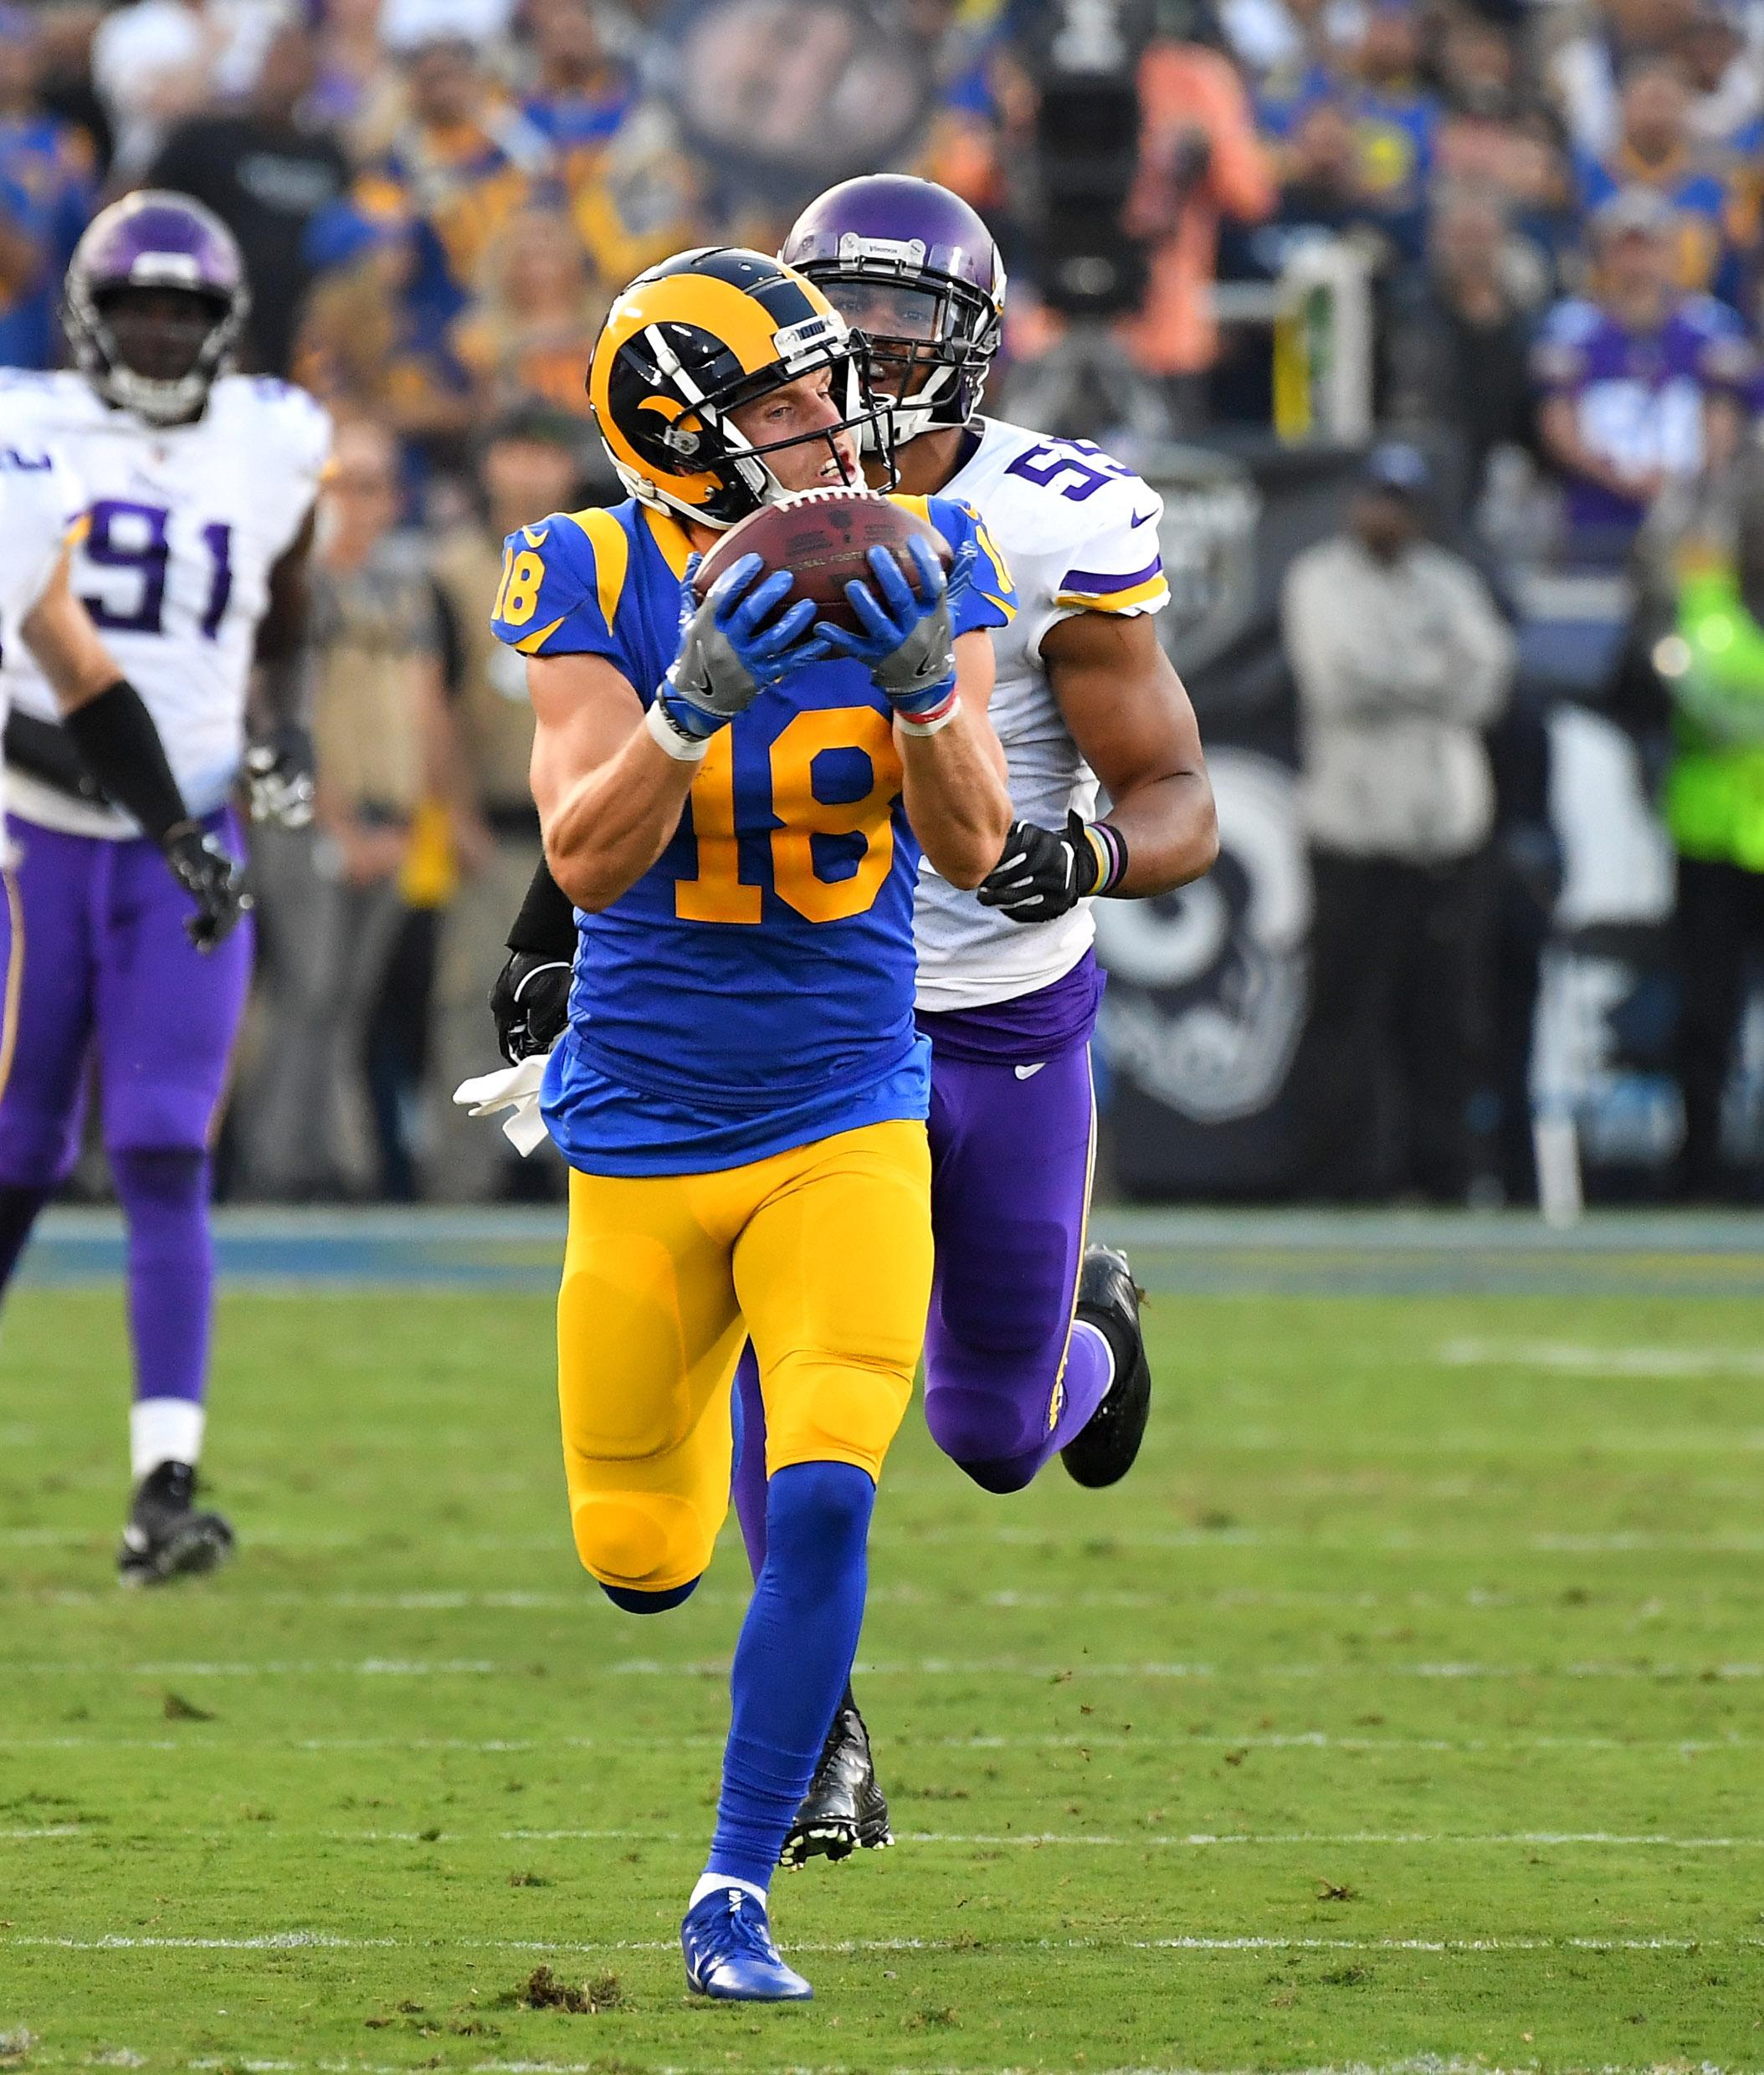 Rams' Cooper Kupp Suffers Torn ACL